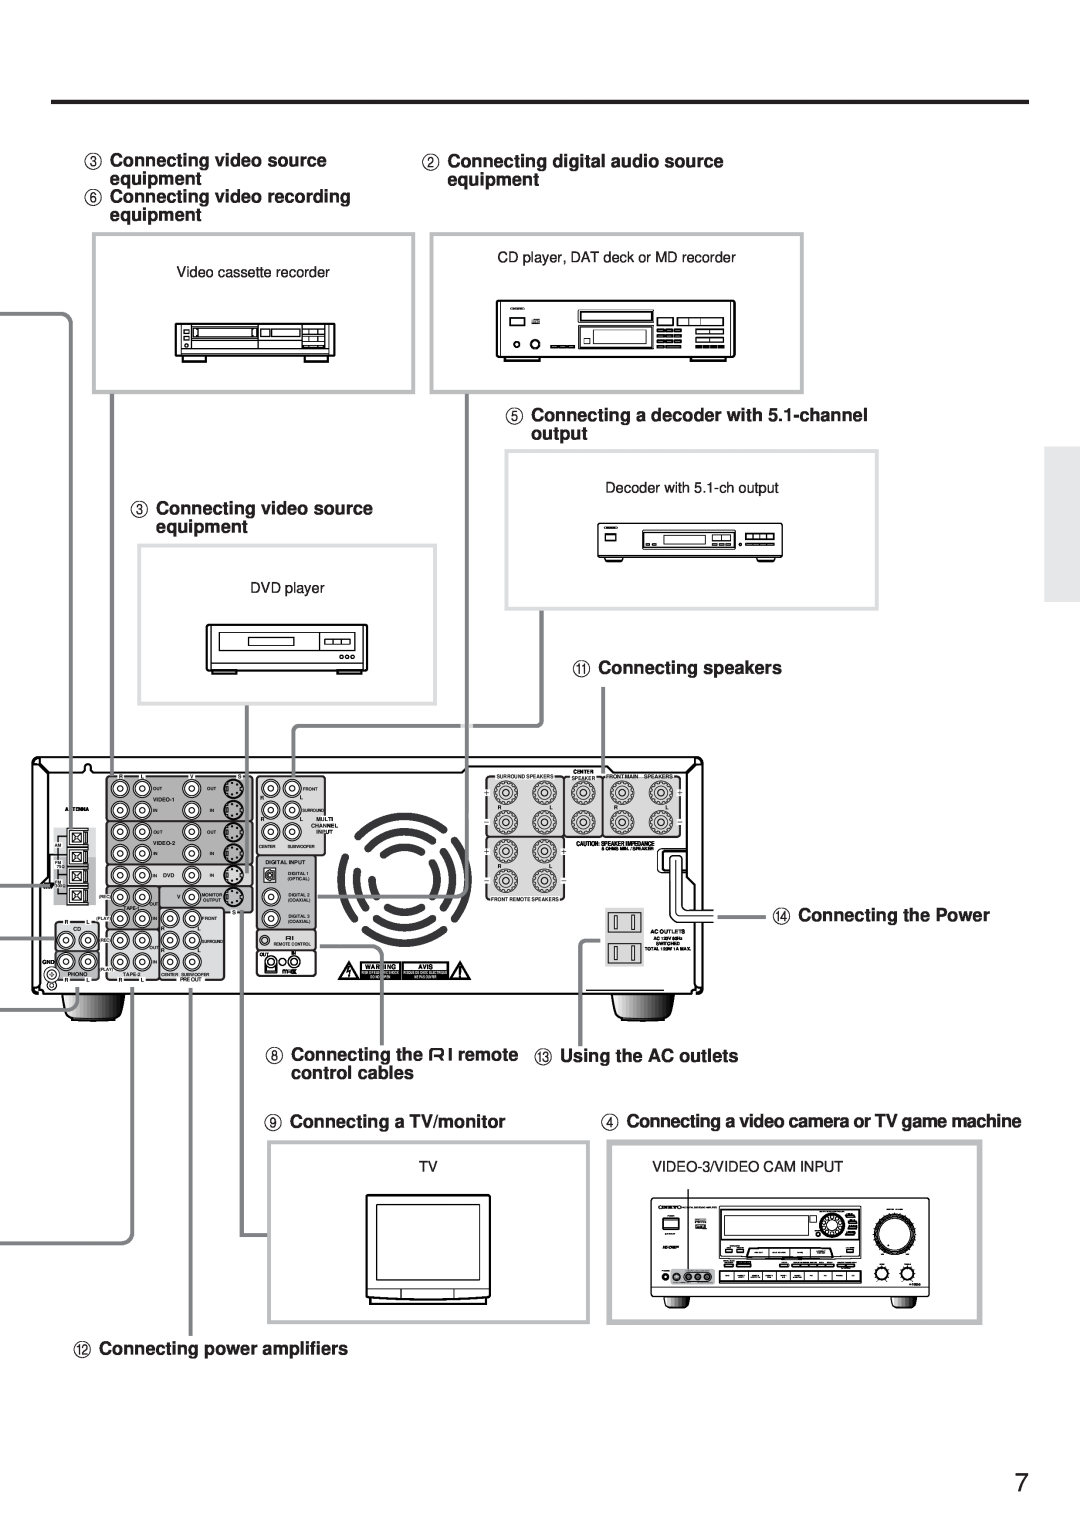 Onkyo TX-DS656 3Connecting video source equipment, 6Connecting video recording equipment, AConnecting speakers 